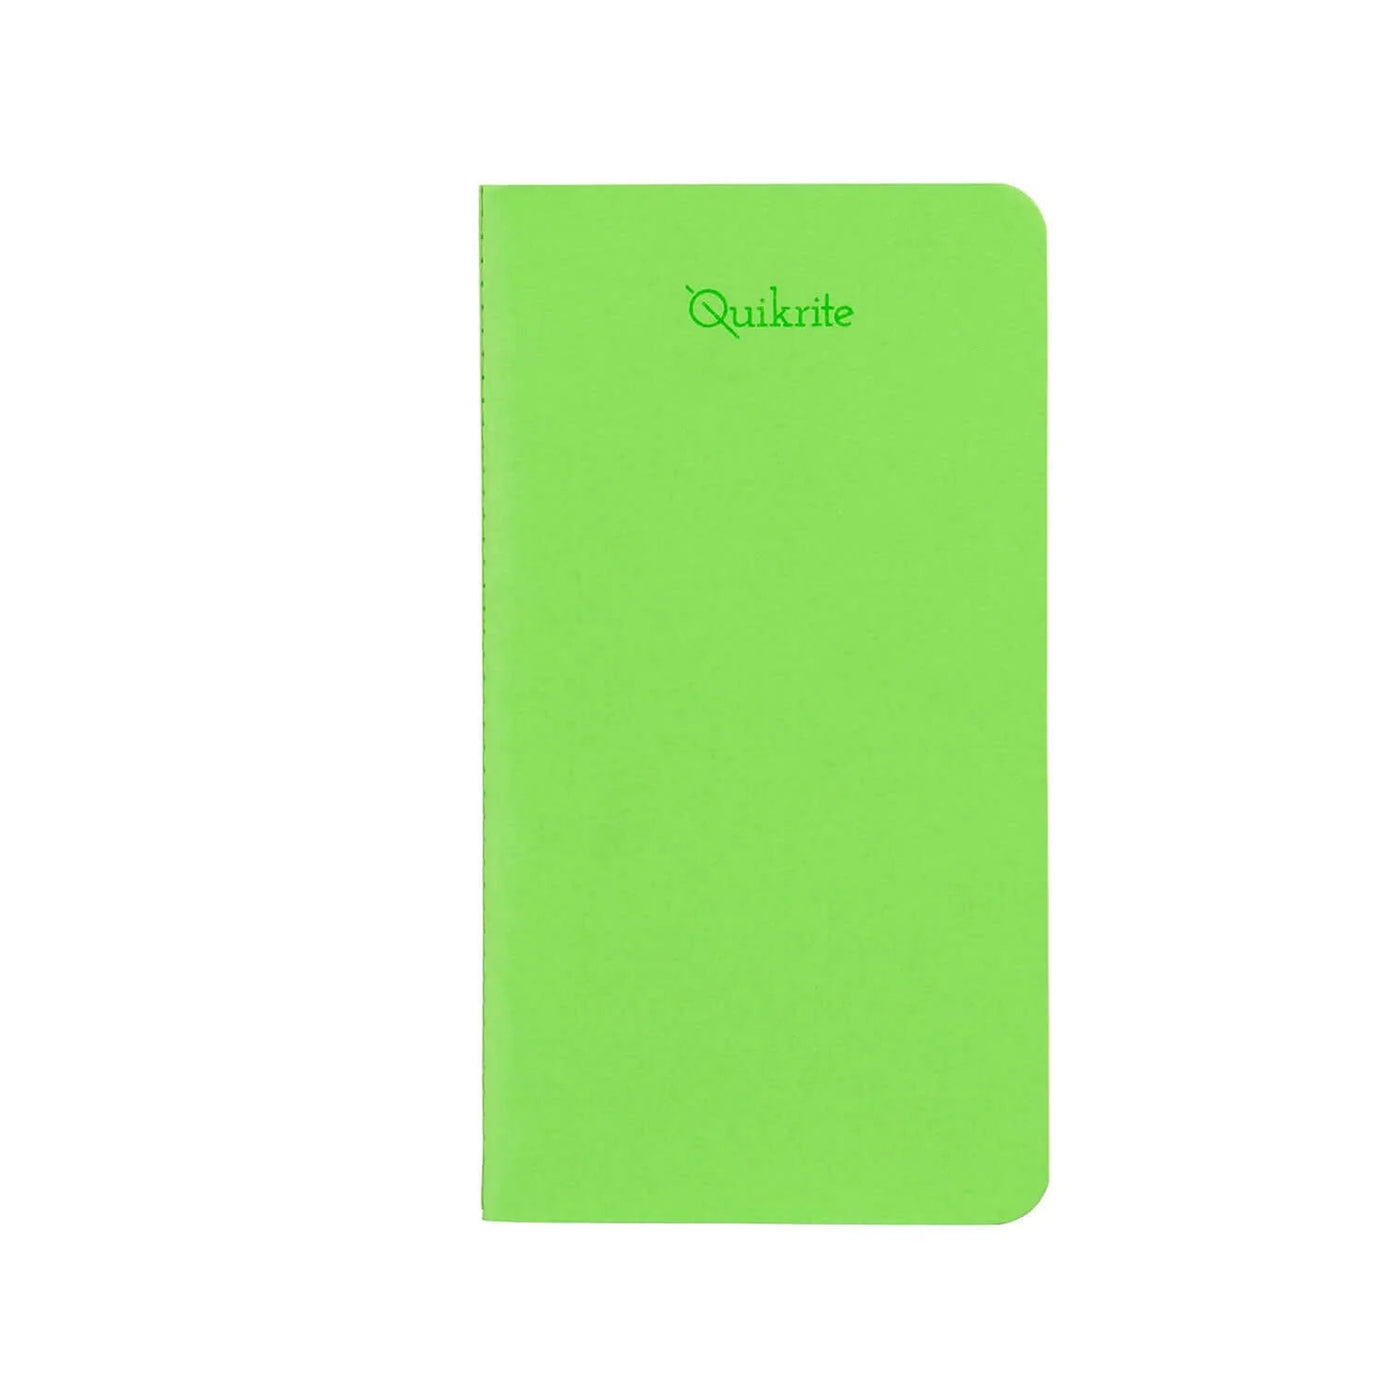 Pennline Quikfill Notebook Refill For Quikrite, Yellow Green - Set Of 2 3